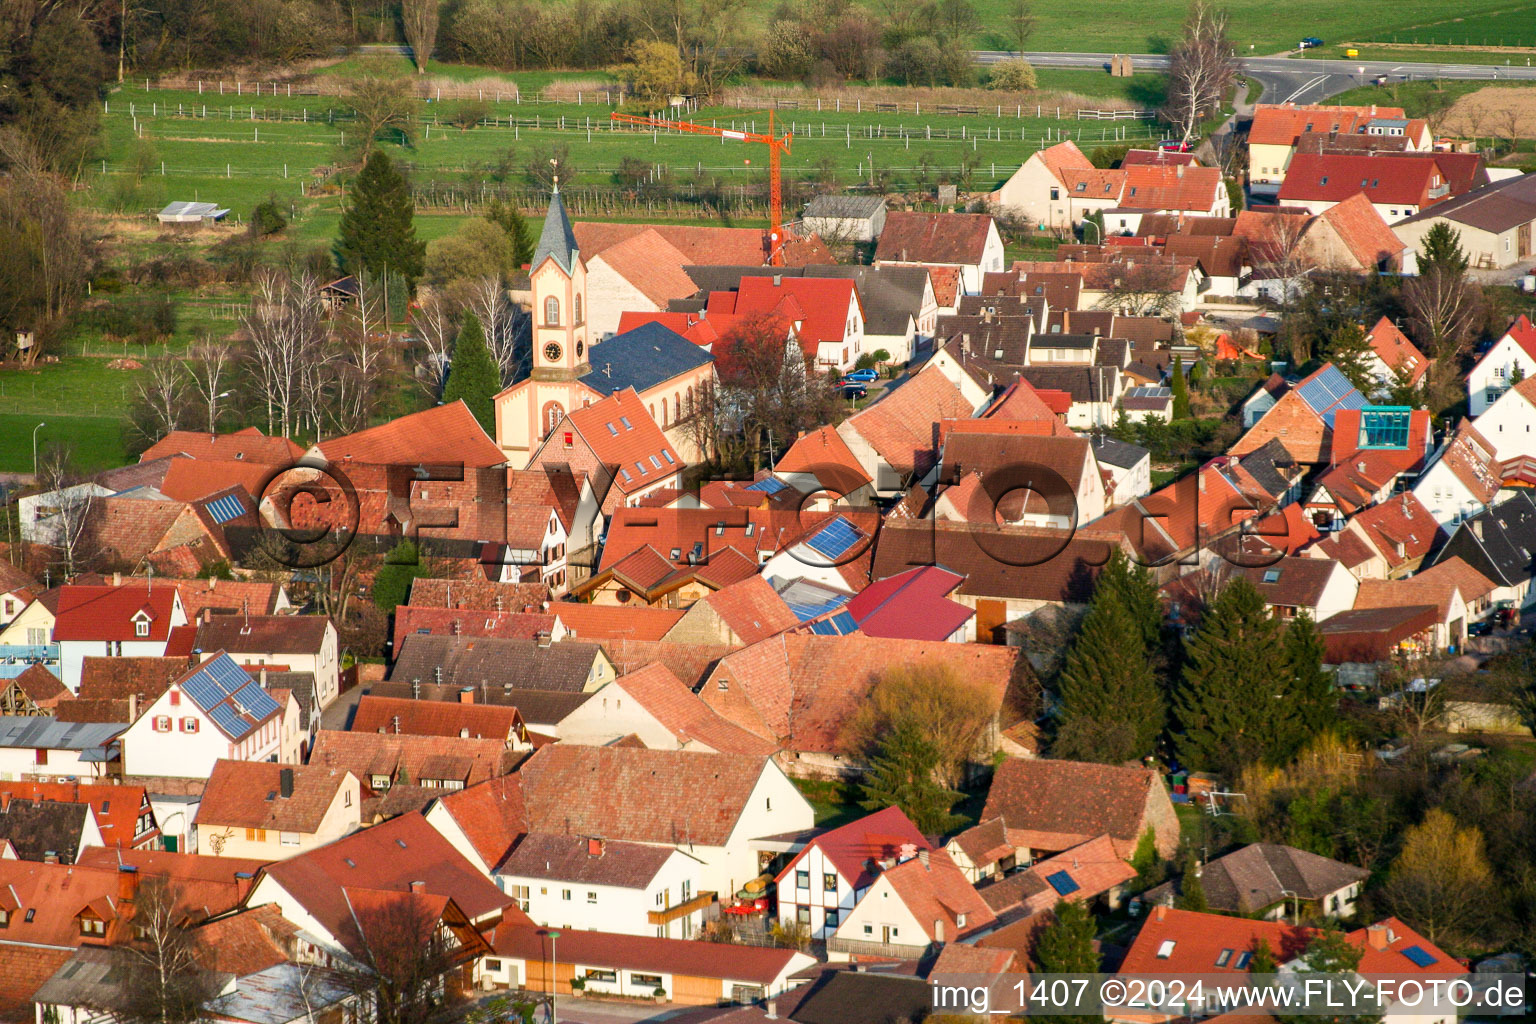 Aerial photograpy of Church building in the village of in the district Ingenheim in Billigheim-Ingenheim in the state Rhineland-Palatinate